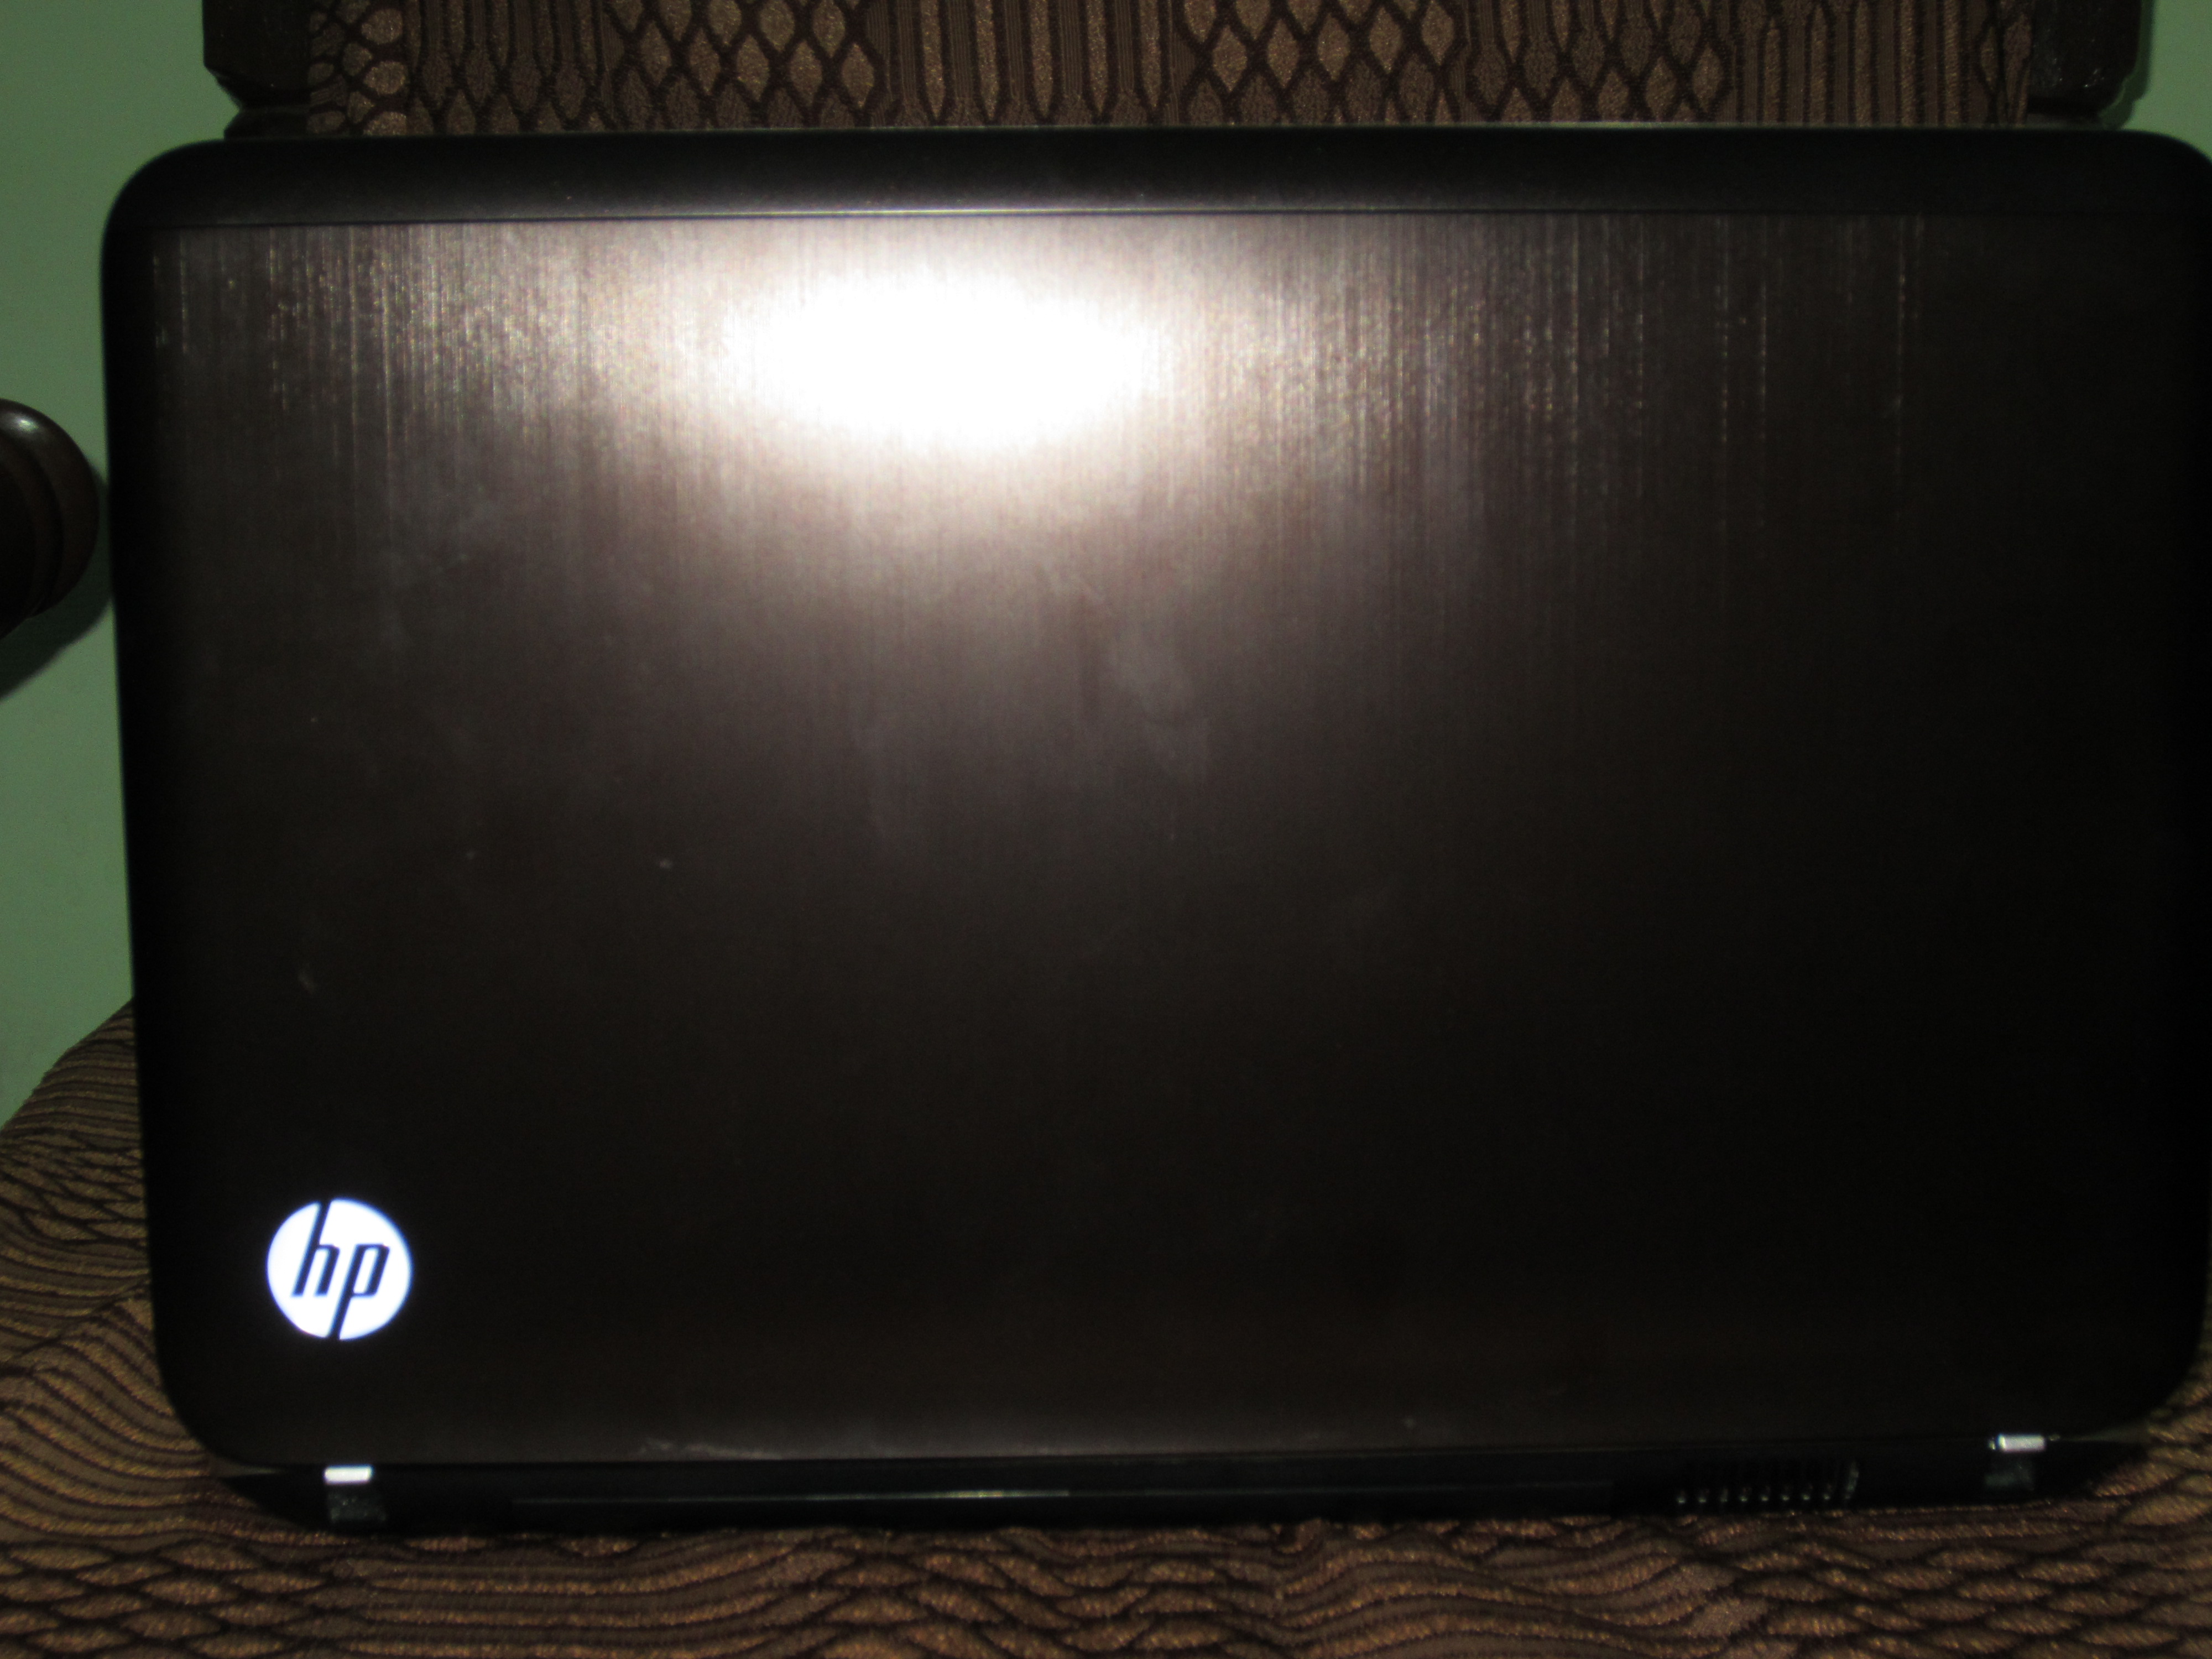 HP Dv6 Series laptop Review, prices and specification in India 